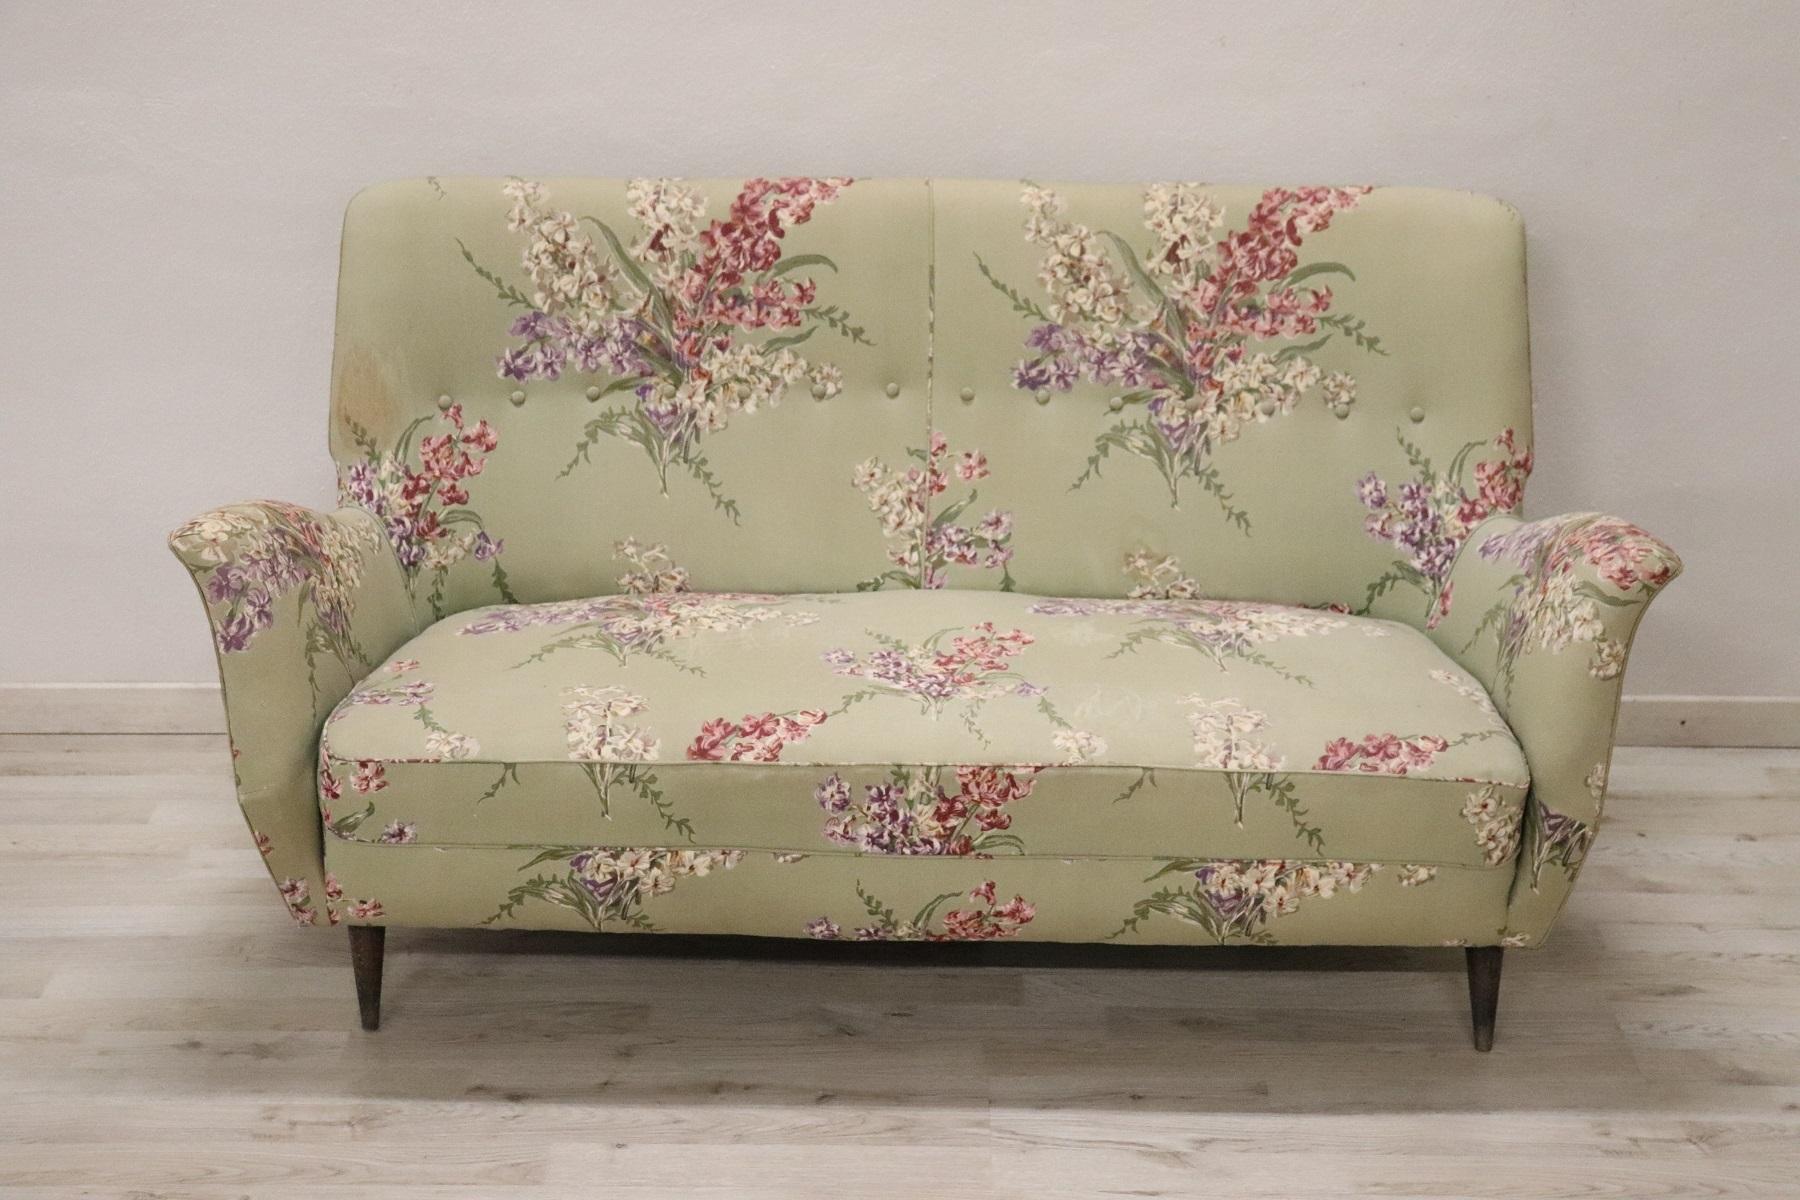 Lovely italian design sofa 1950s. Excellent condition in the wooden structure, signs of wear and stains in the fabric, replacement is recommended.